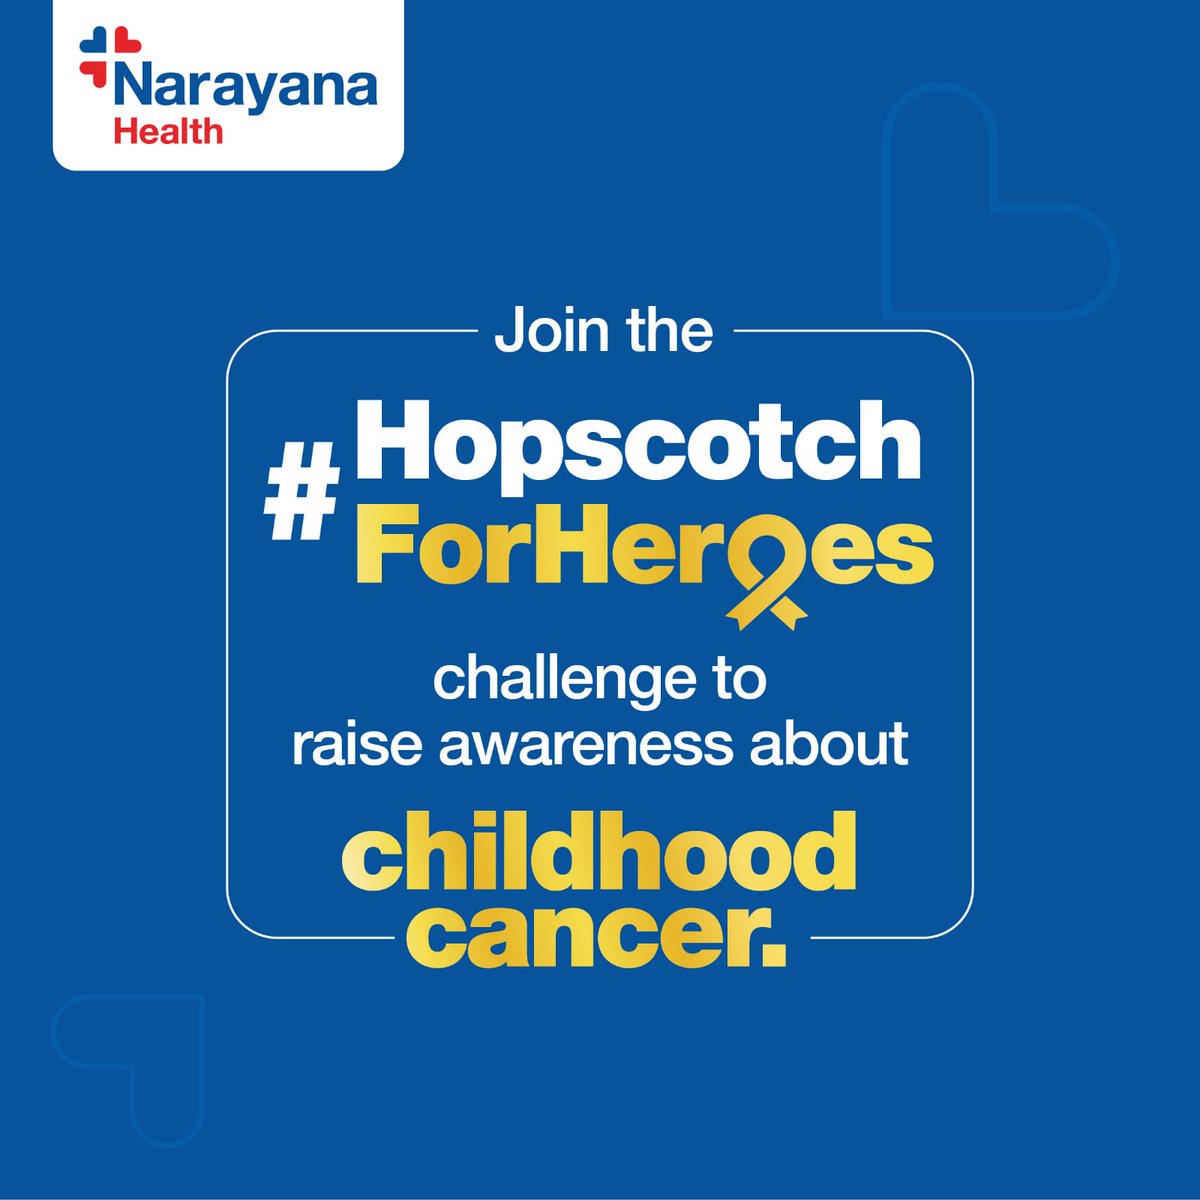 Join Hopscotch For Heroes challenge to raise awareness on childhood cancer – Narayana Health